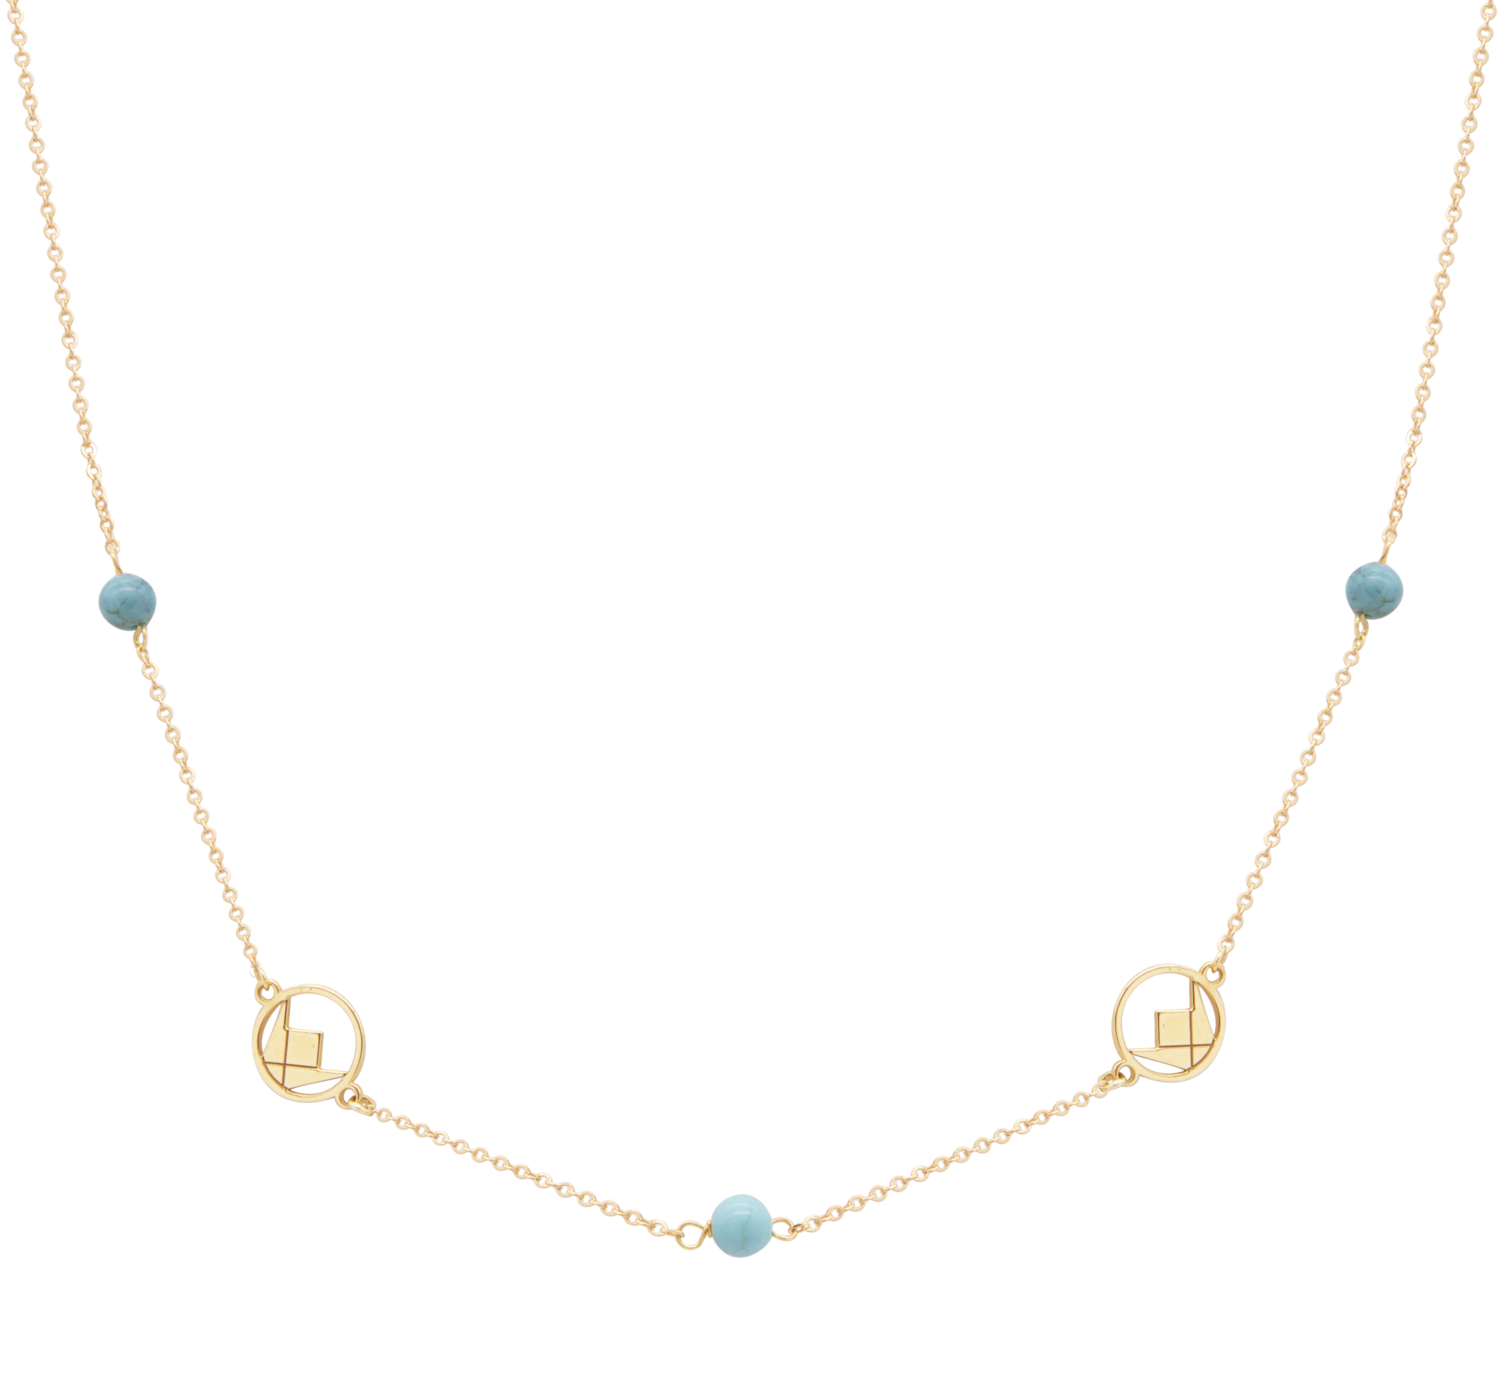 Emblem Gold Necklace with Colored Stones